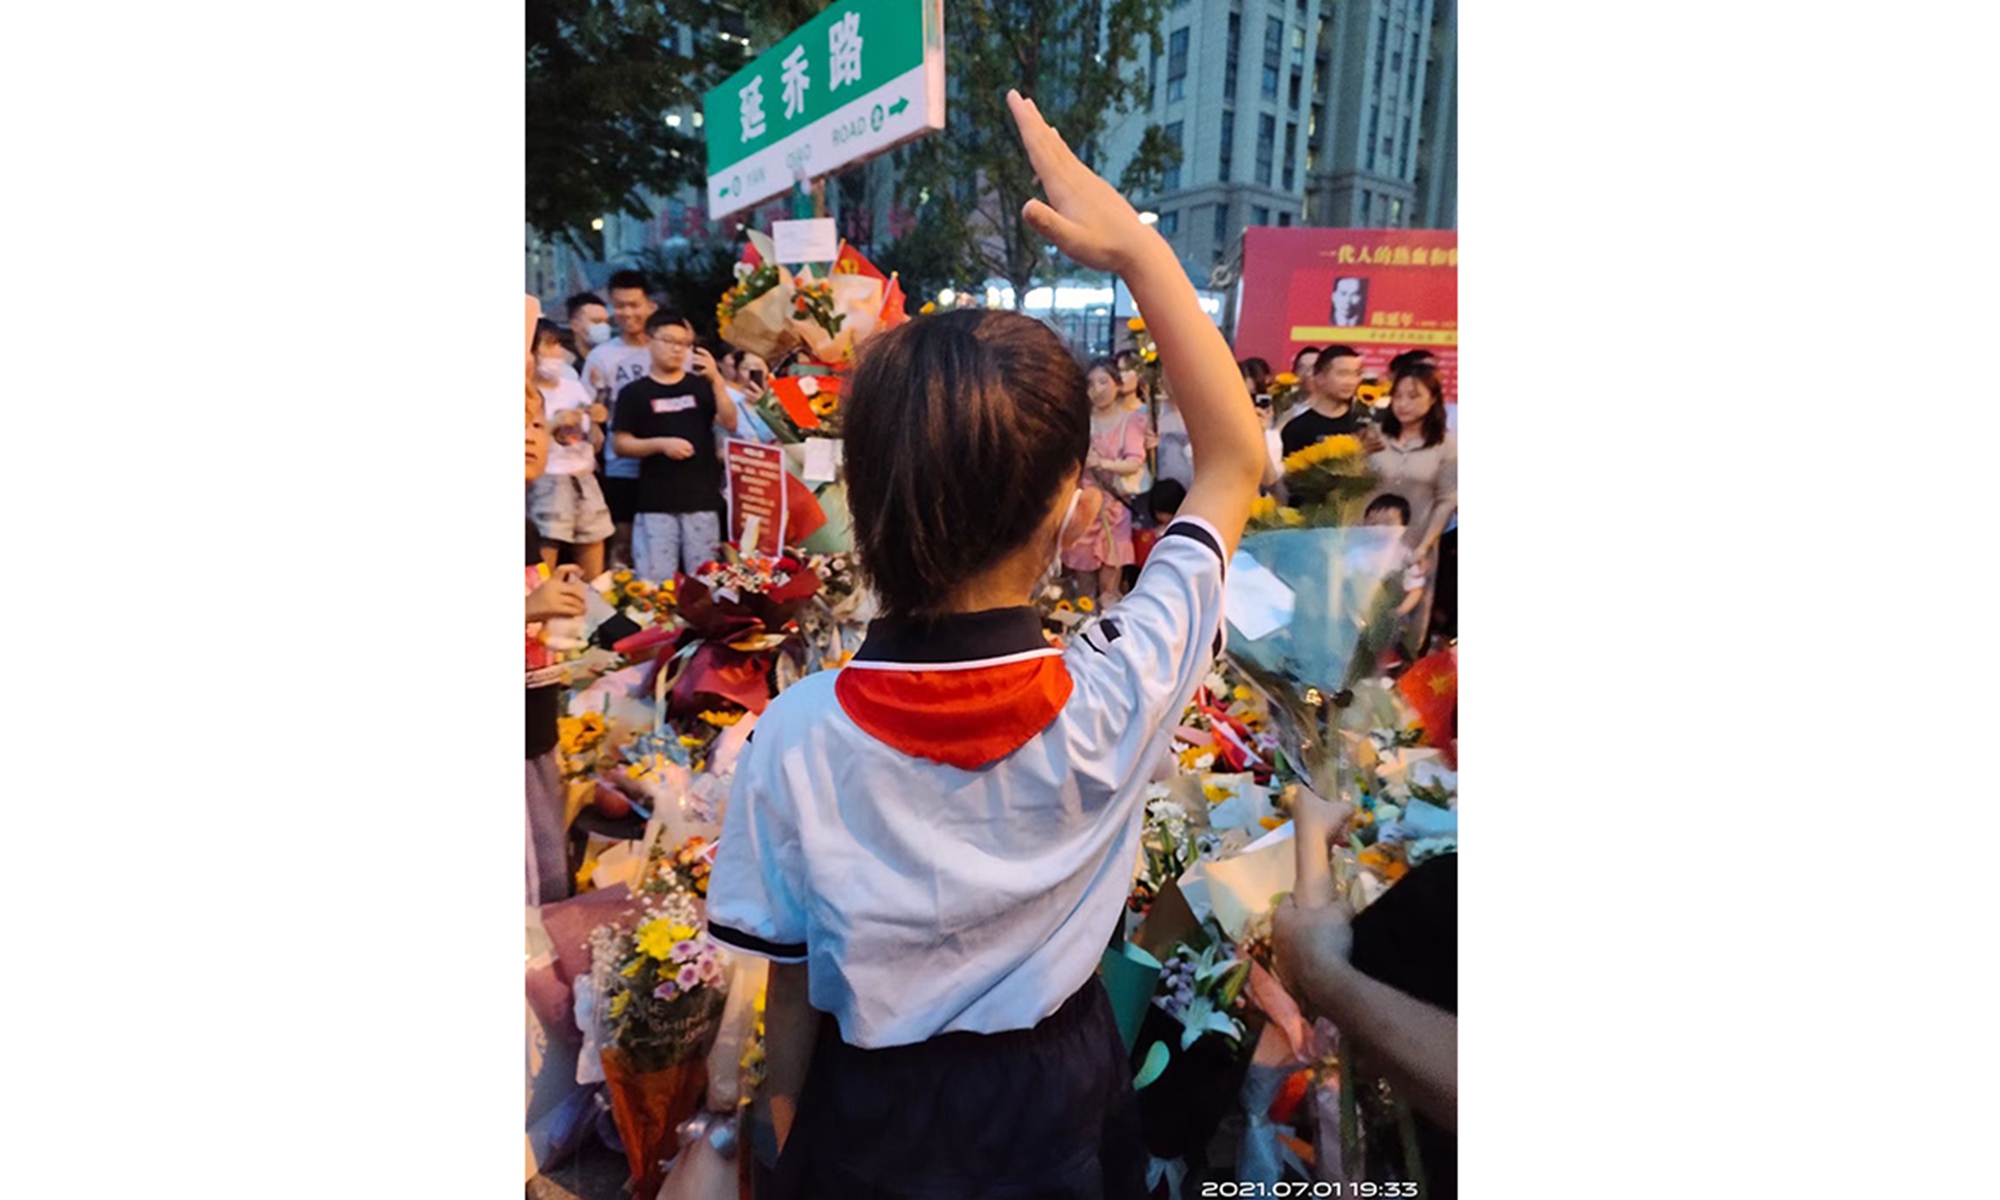 A Young Pioneer wearing a red scarf salutes the Yanqiao Road sign in Hefei, East China's Anhui Province on the Party's centennial. Photo: Zeng Hui